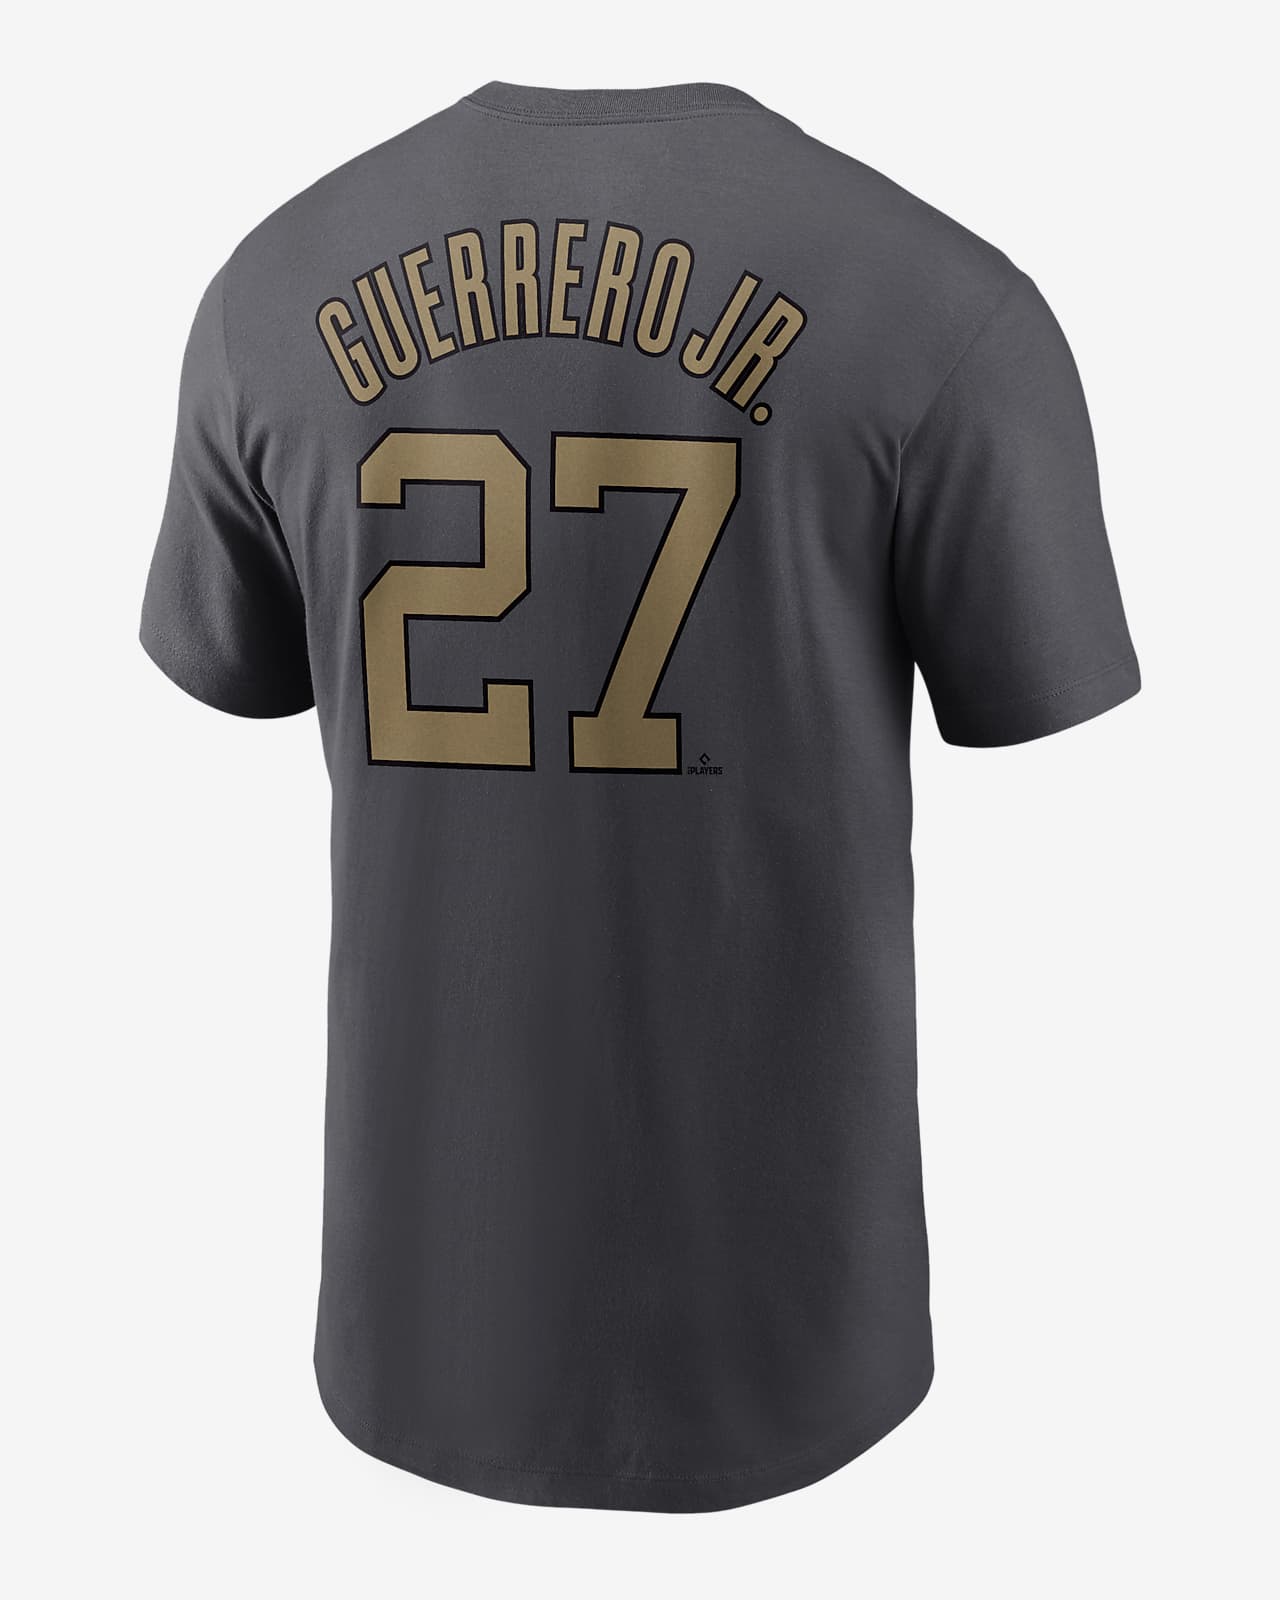 2022 all star game jersey mlb